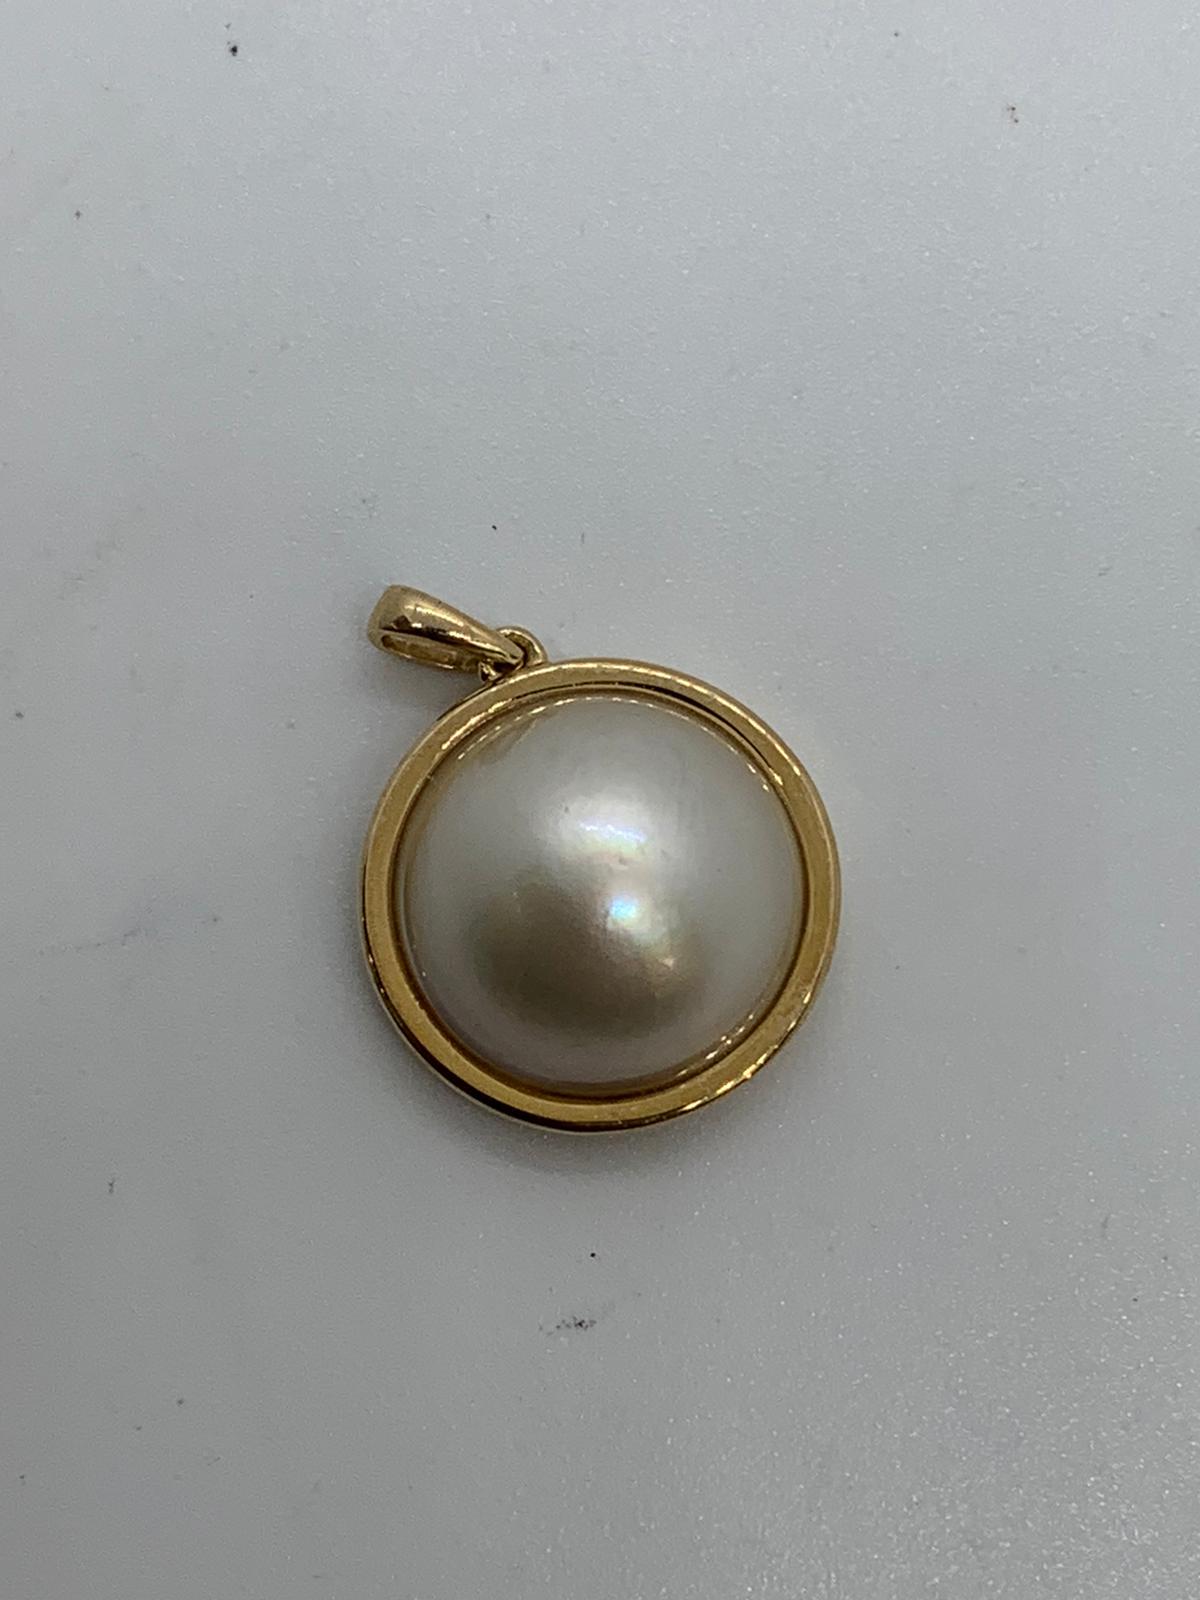 9ct gold pearl pendant - Image 2 of 2